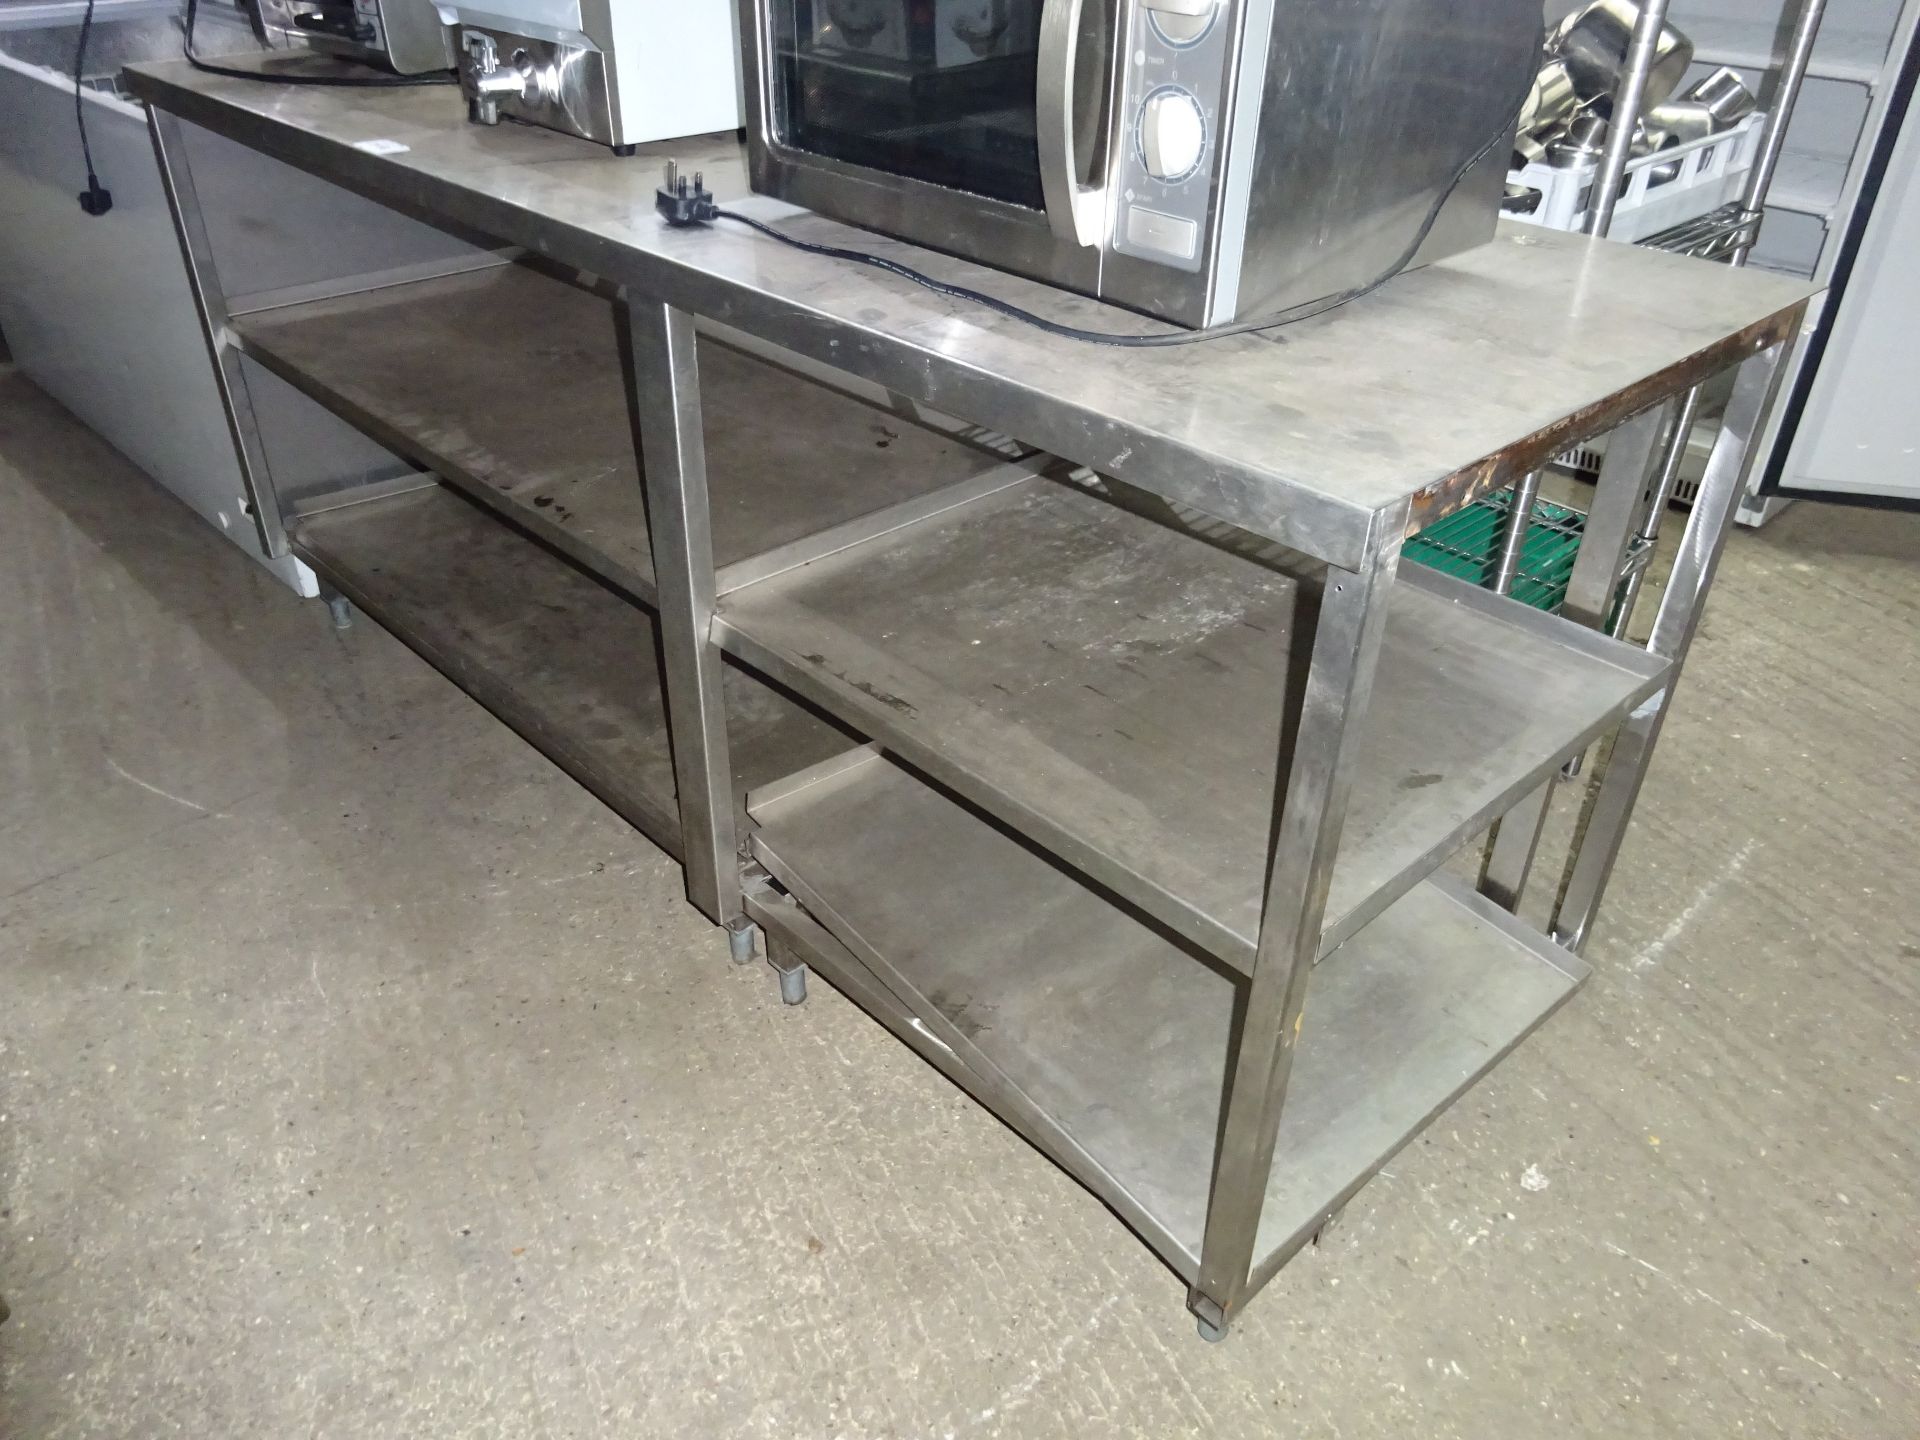 Stainless steel 3 tier prep table with centre holes, width 205cms, depth 72cms and height 92cms.